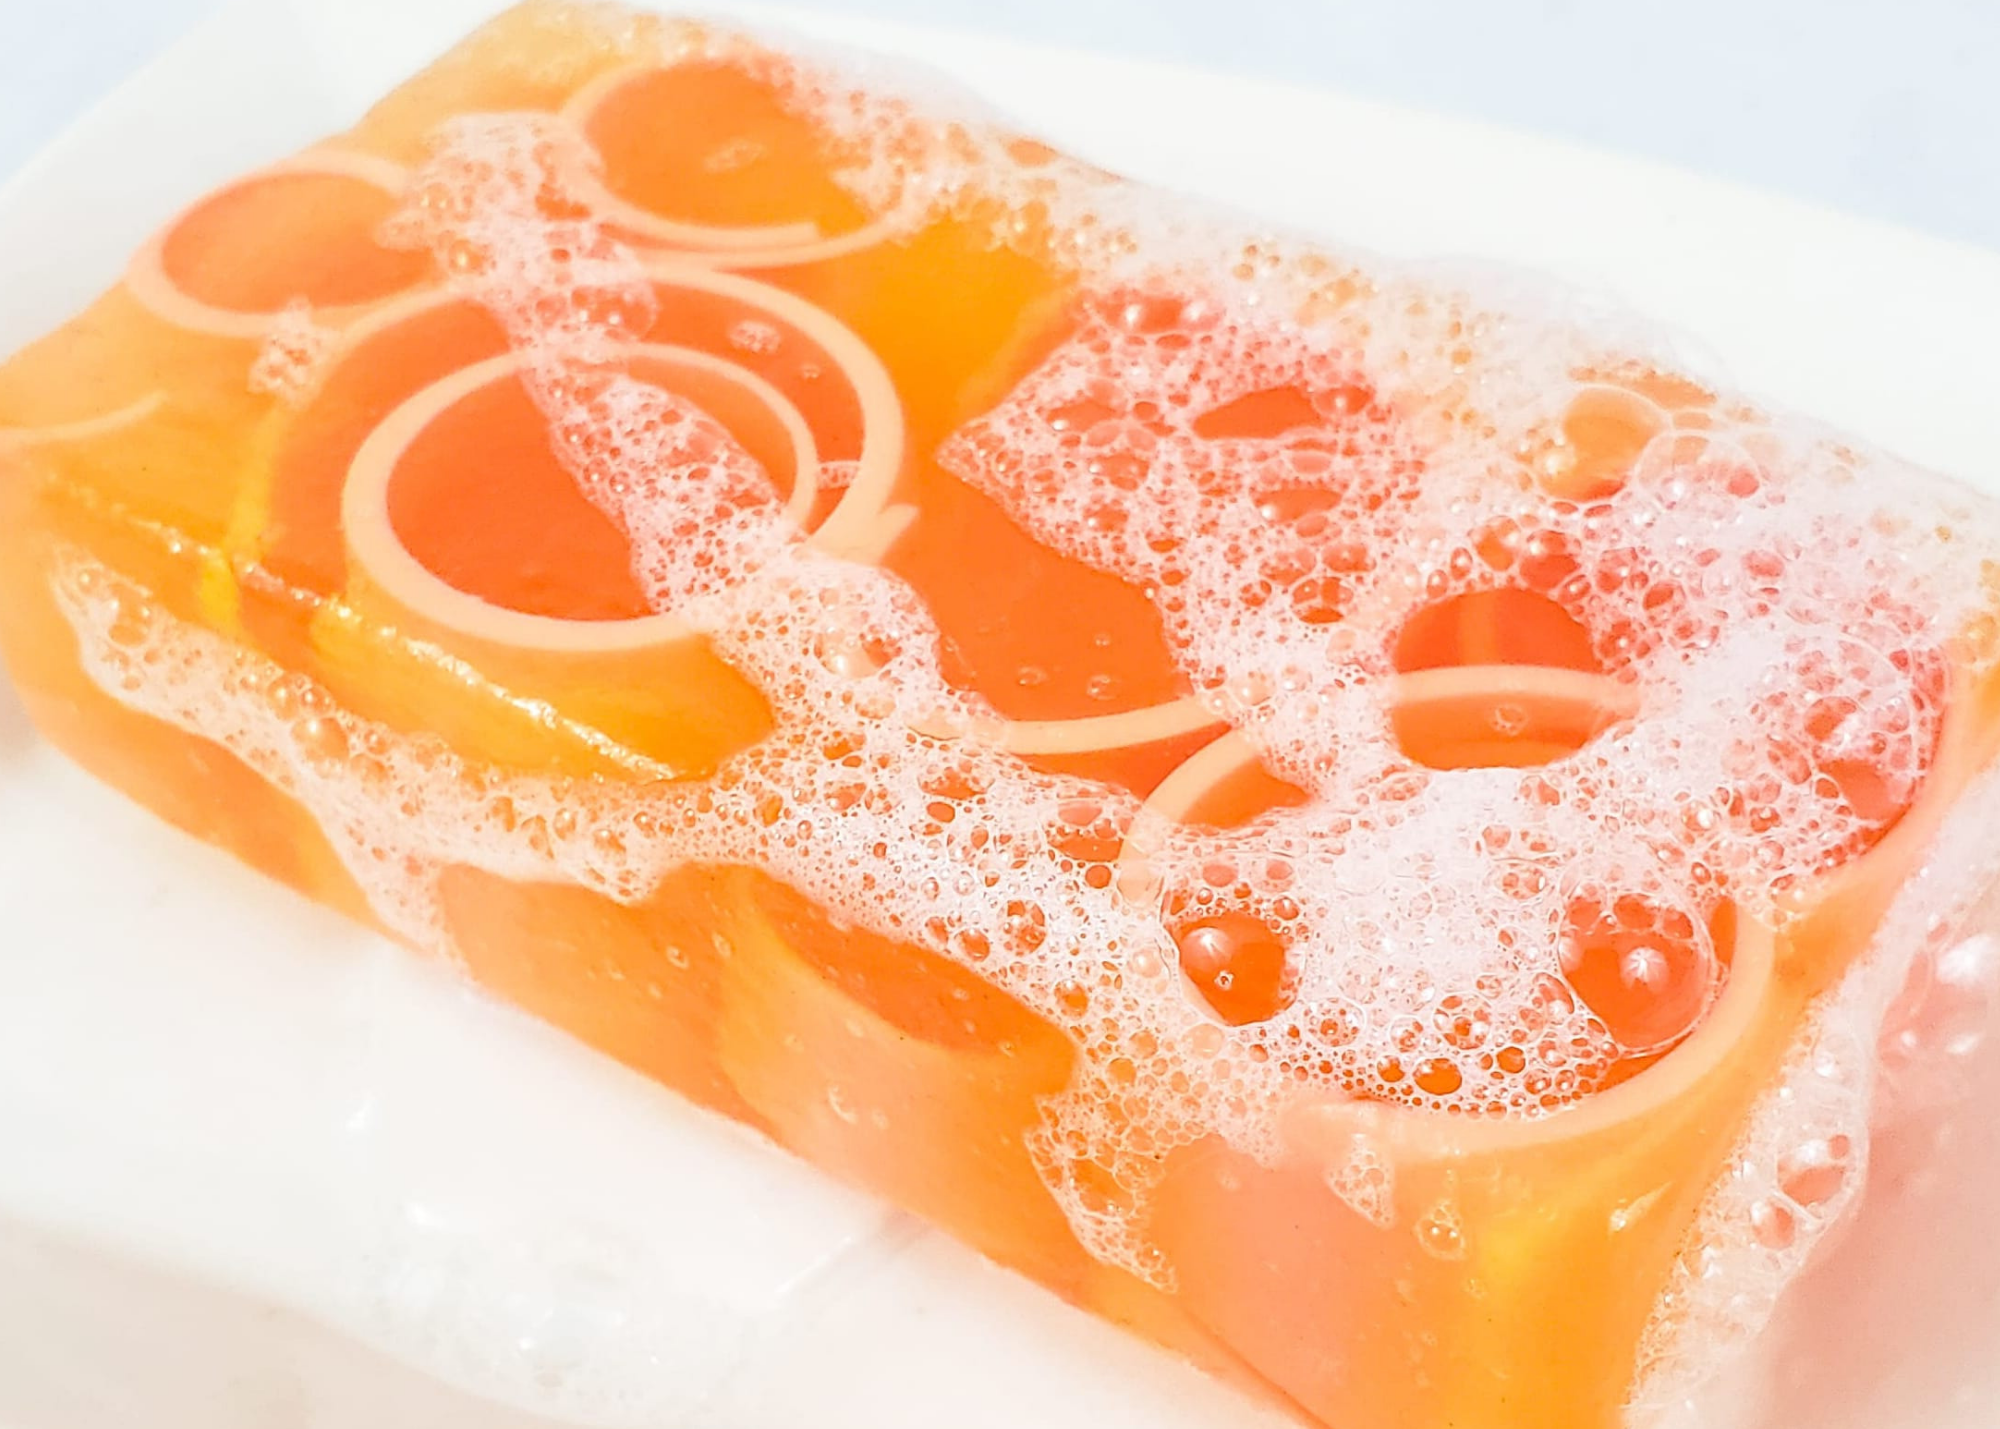 Orange bar of soap with bubbles on it